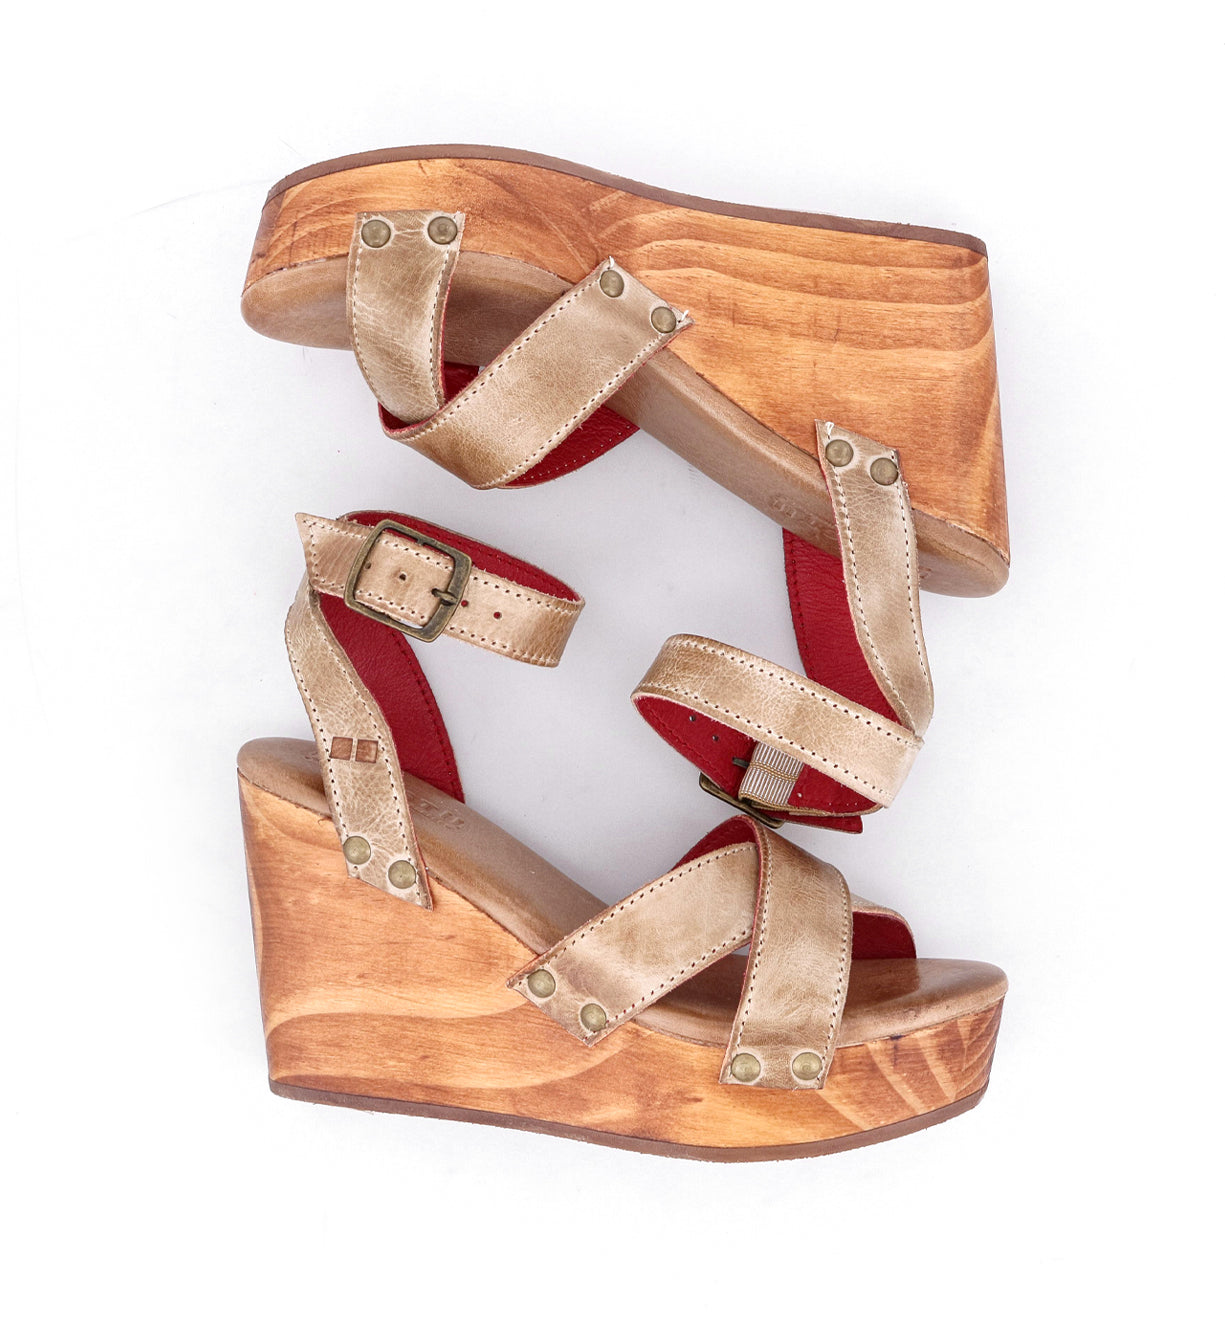 A pair of Grettell wooden wedge sandals with red straps made by Bed Stu.